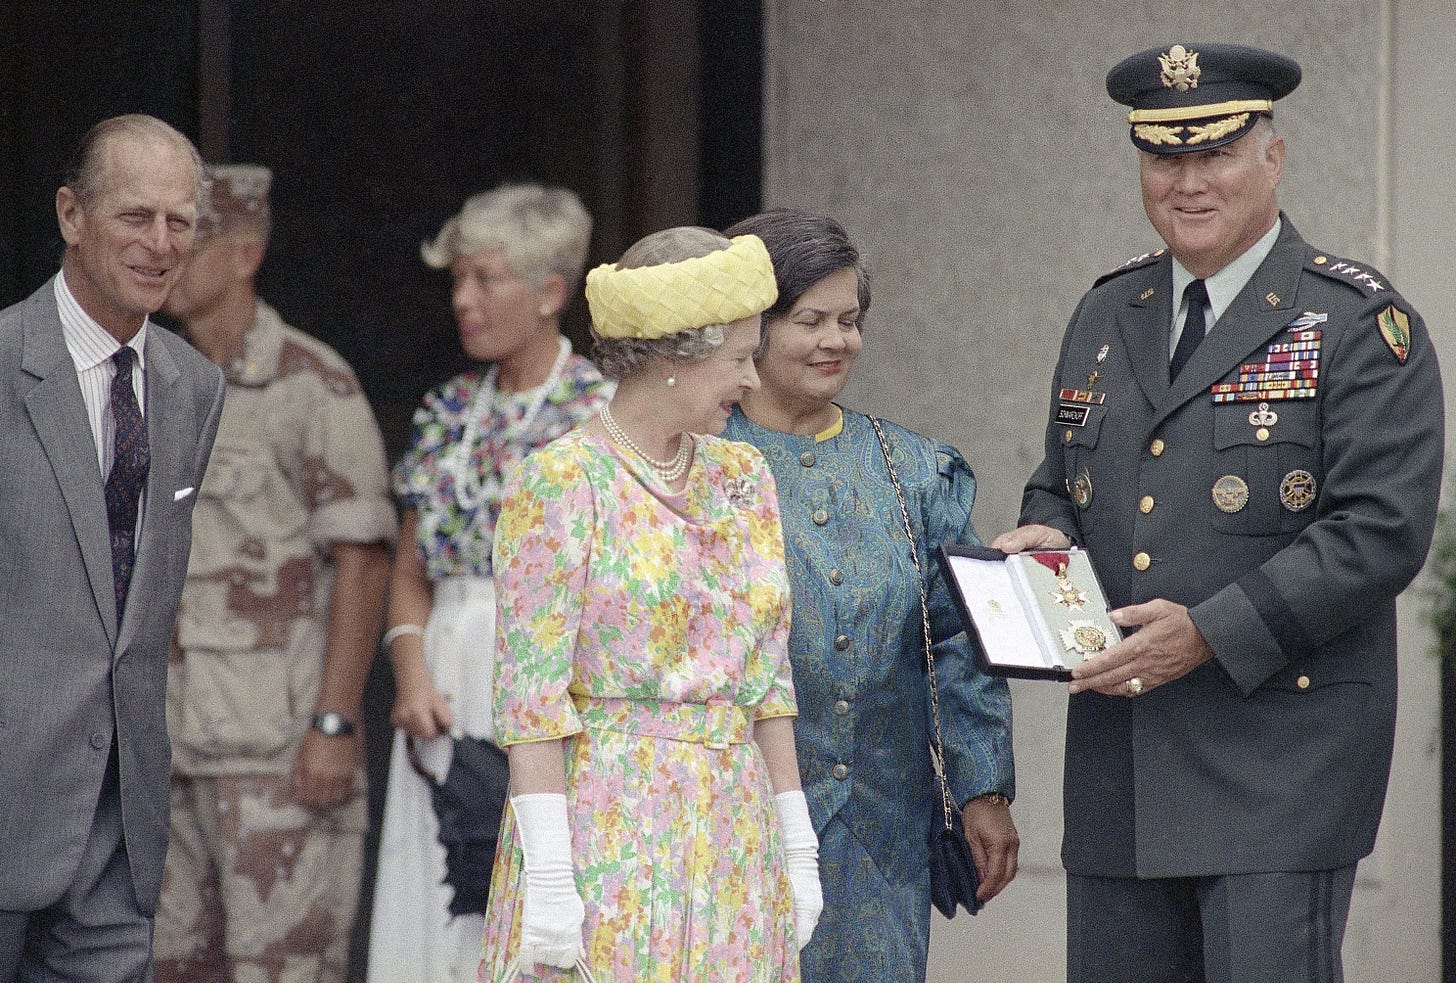 Remembering Queen Elizabeth's 1991 visit to Tampa | WFLA